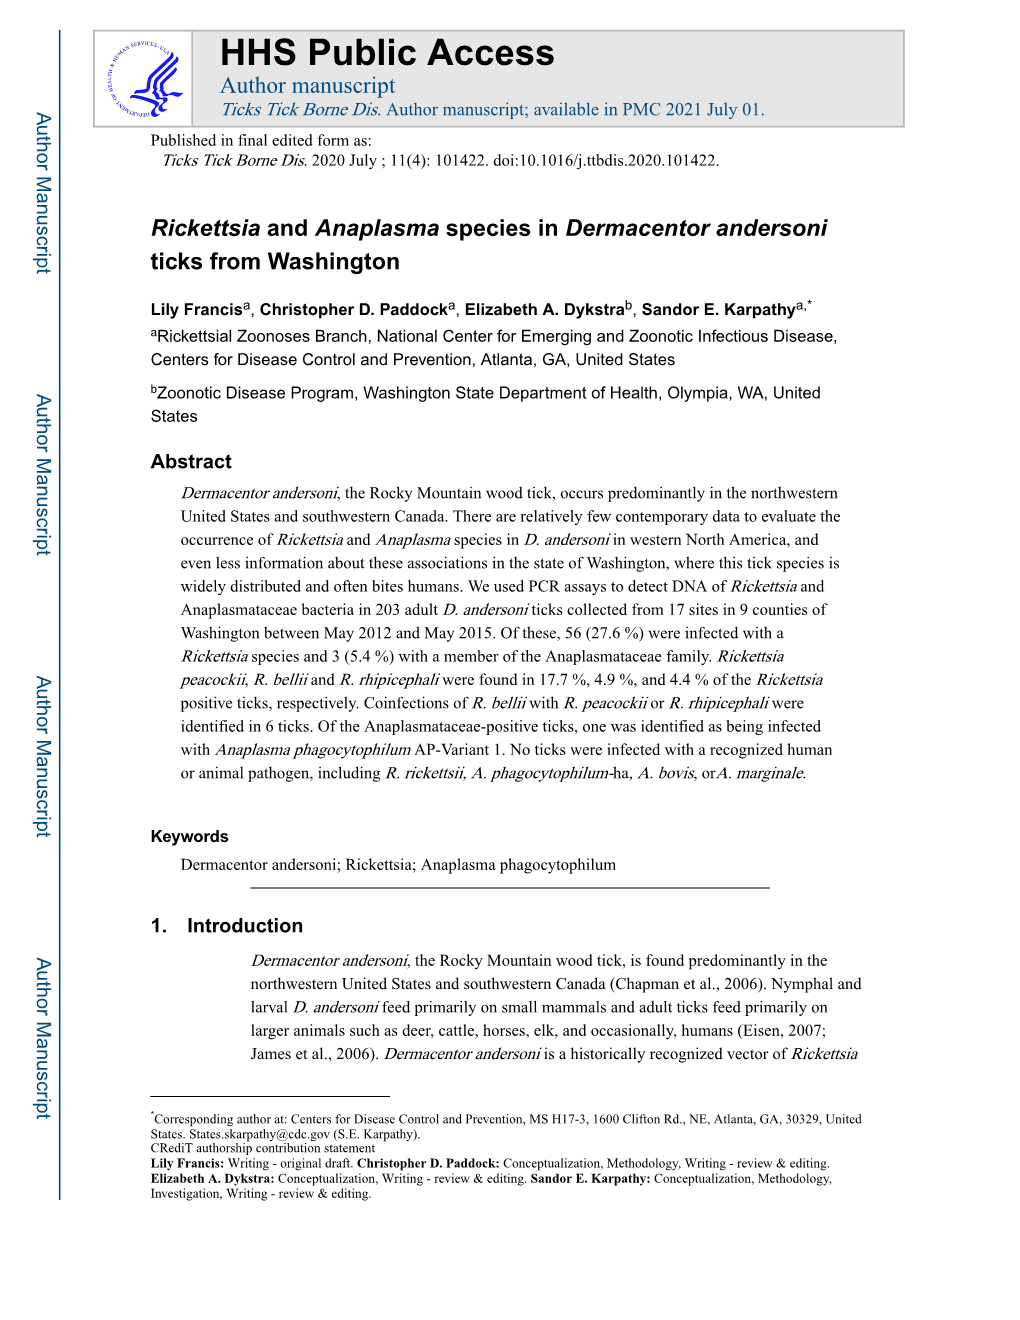 Rickettsia and Anaplasma Species in Dermacentor Andersoni Ticks from Washington